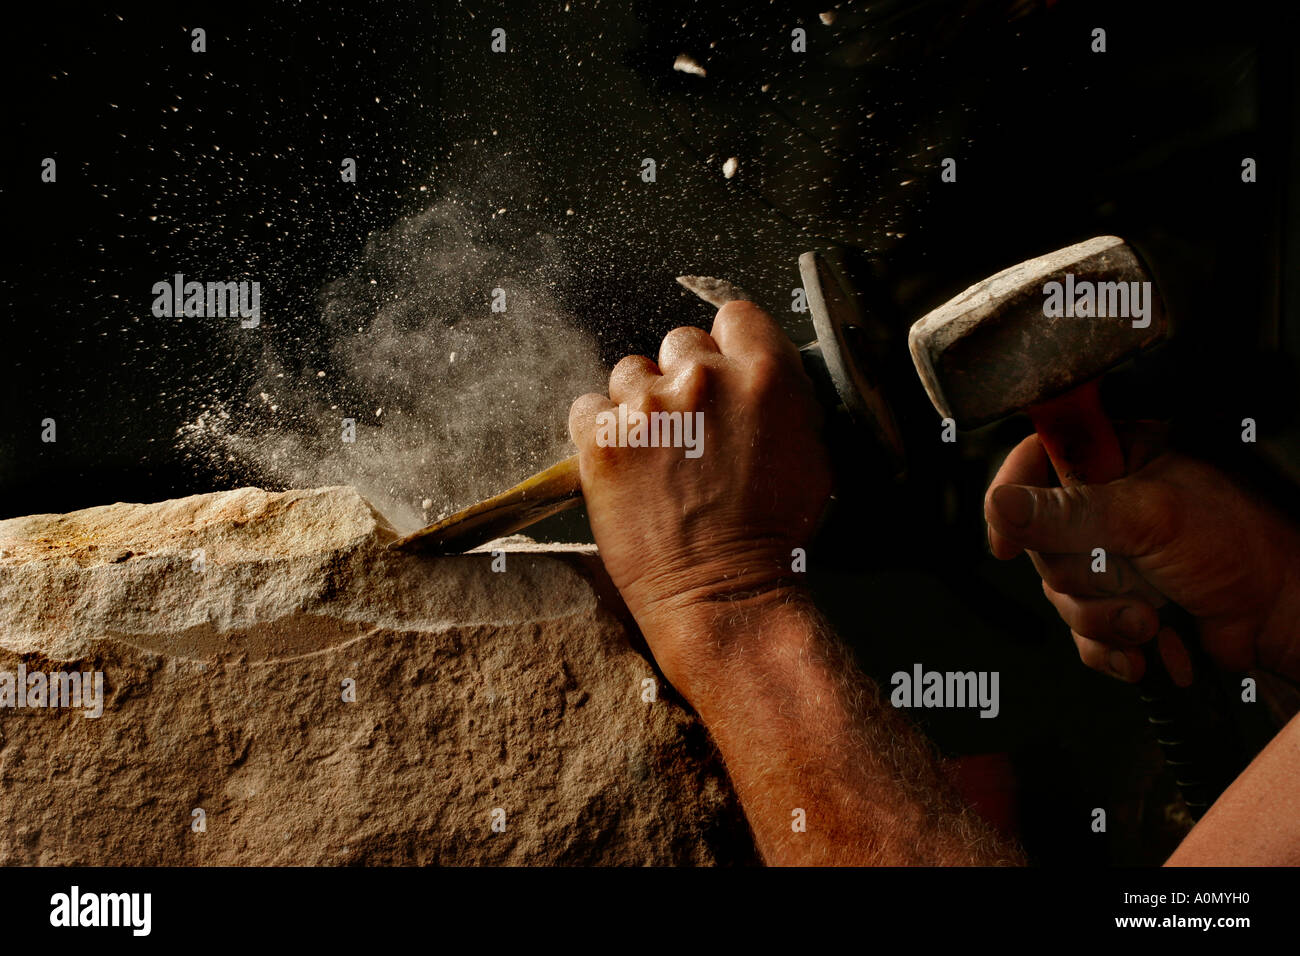 A stonemason works with hammer and cold chisel in studio light Stock Photo